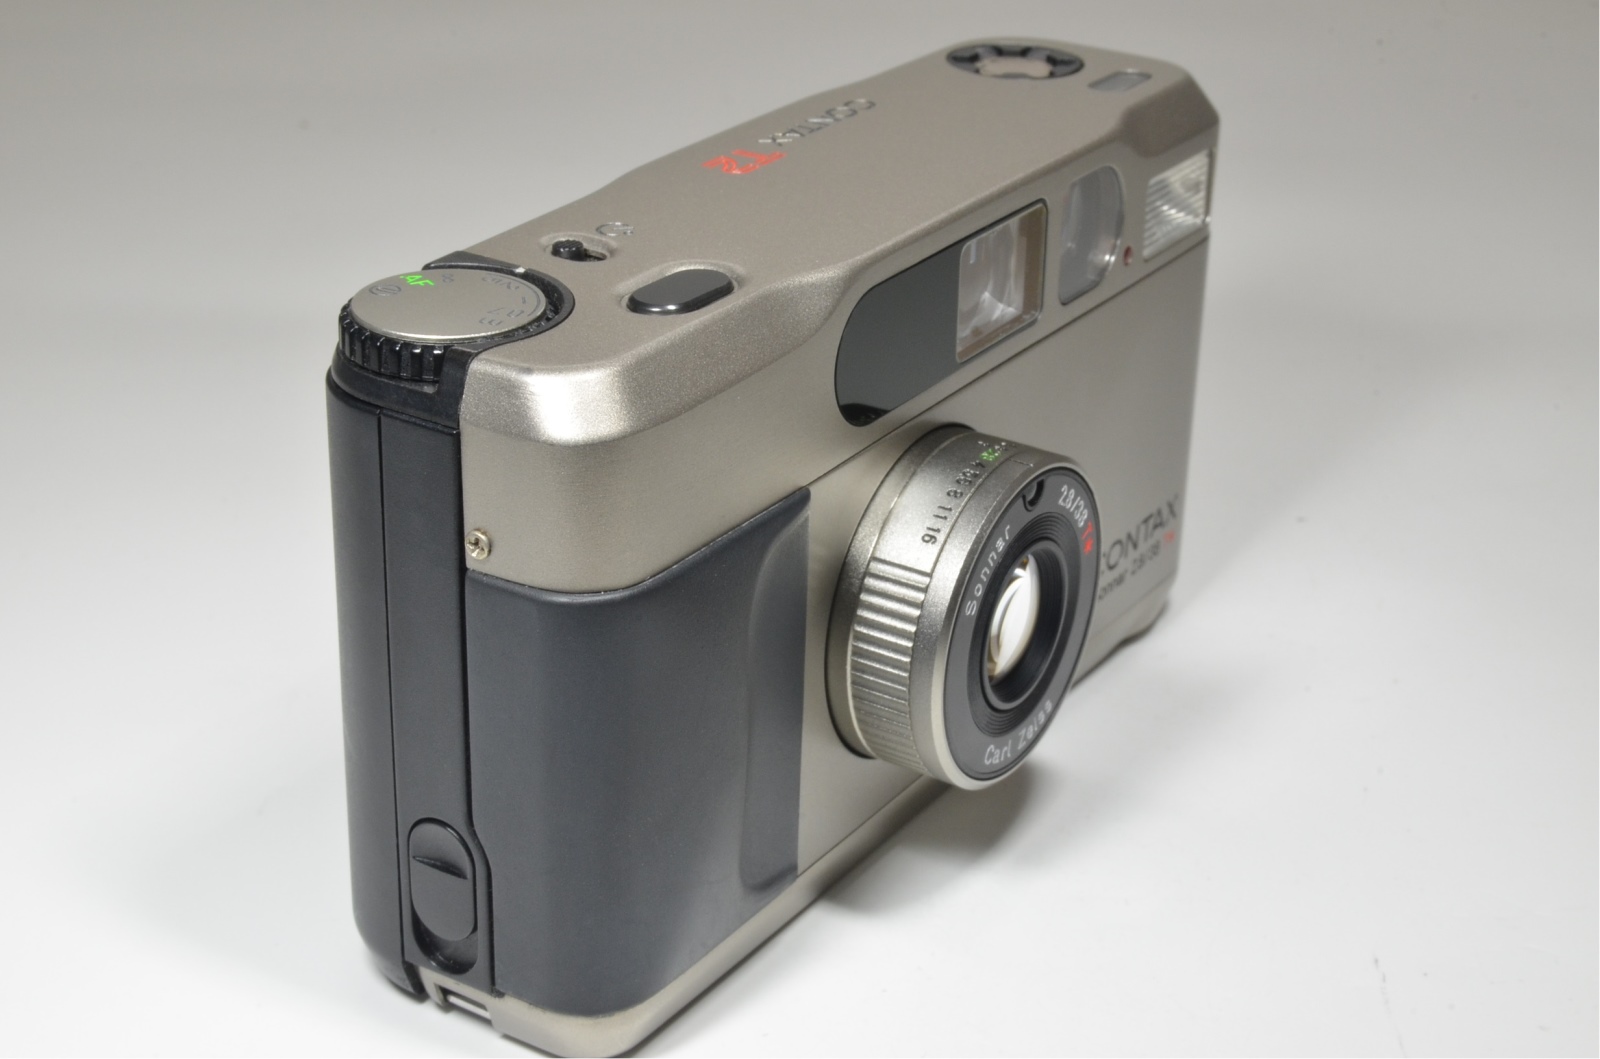 contax t2 point & shoot 35mm film camera from japan #